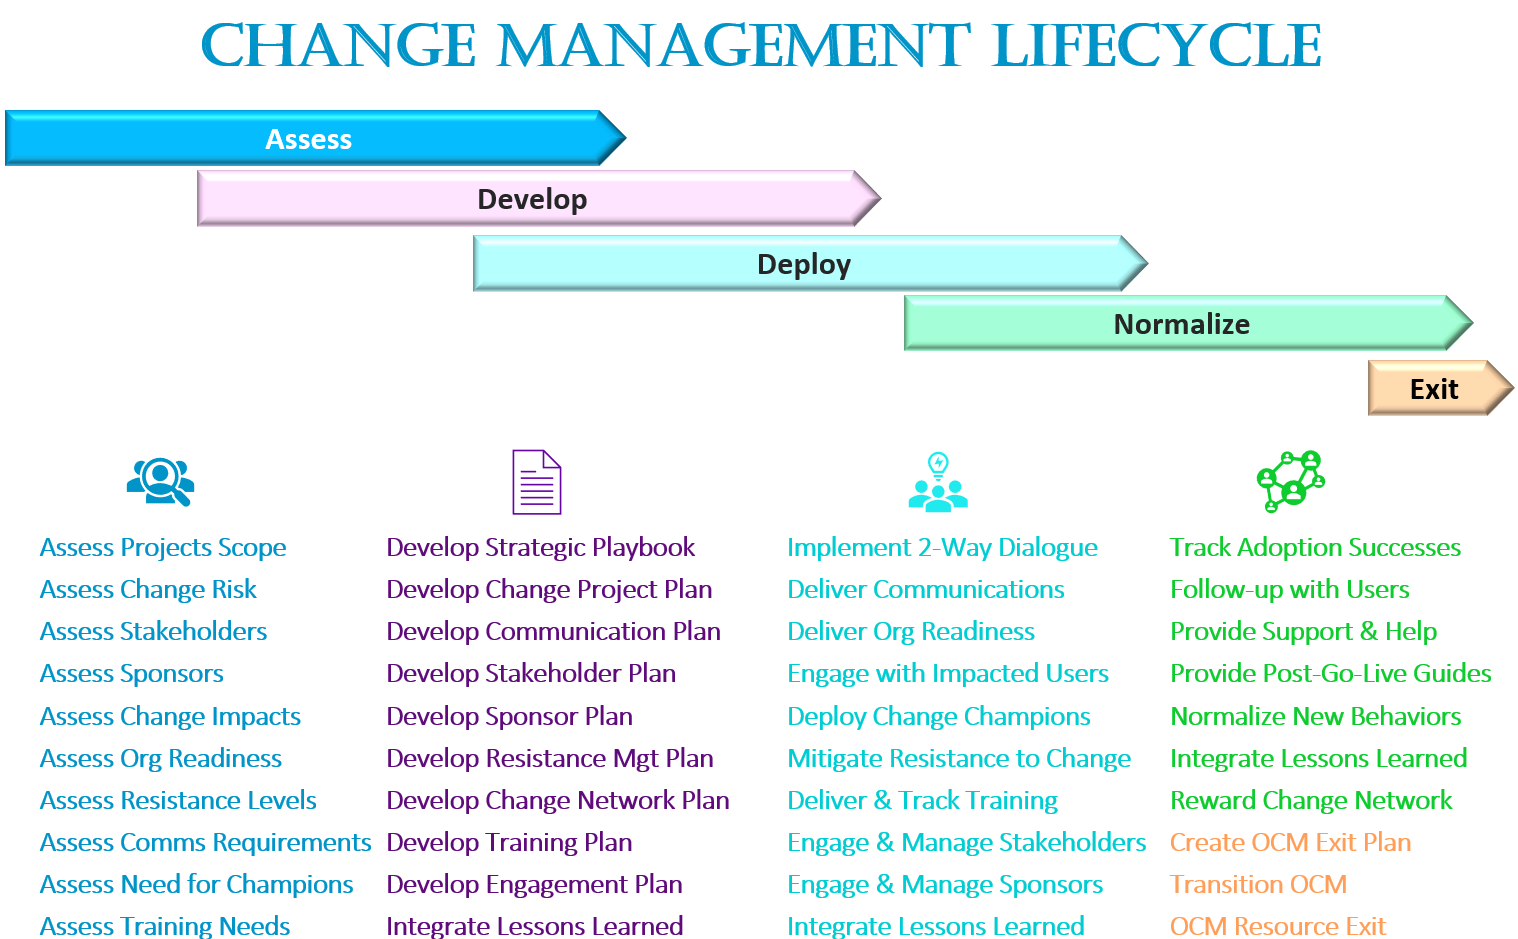 Change Management Lifecycle